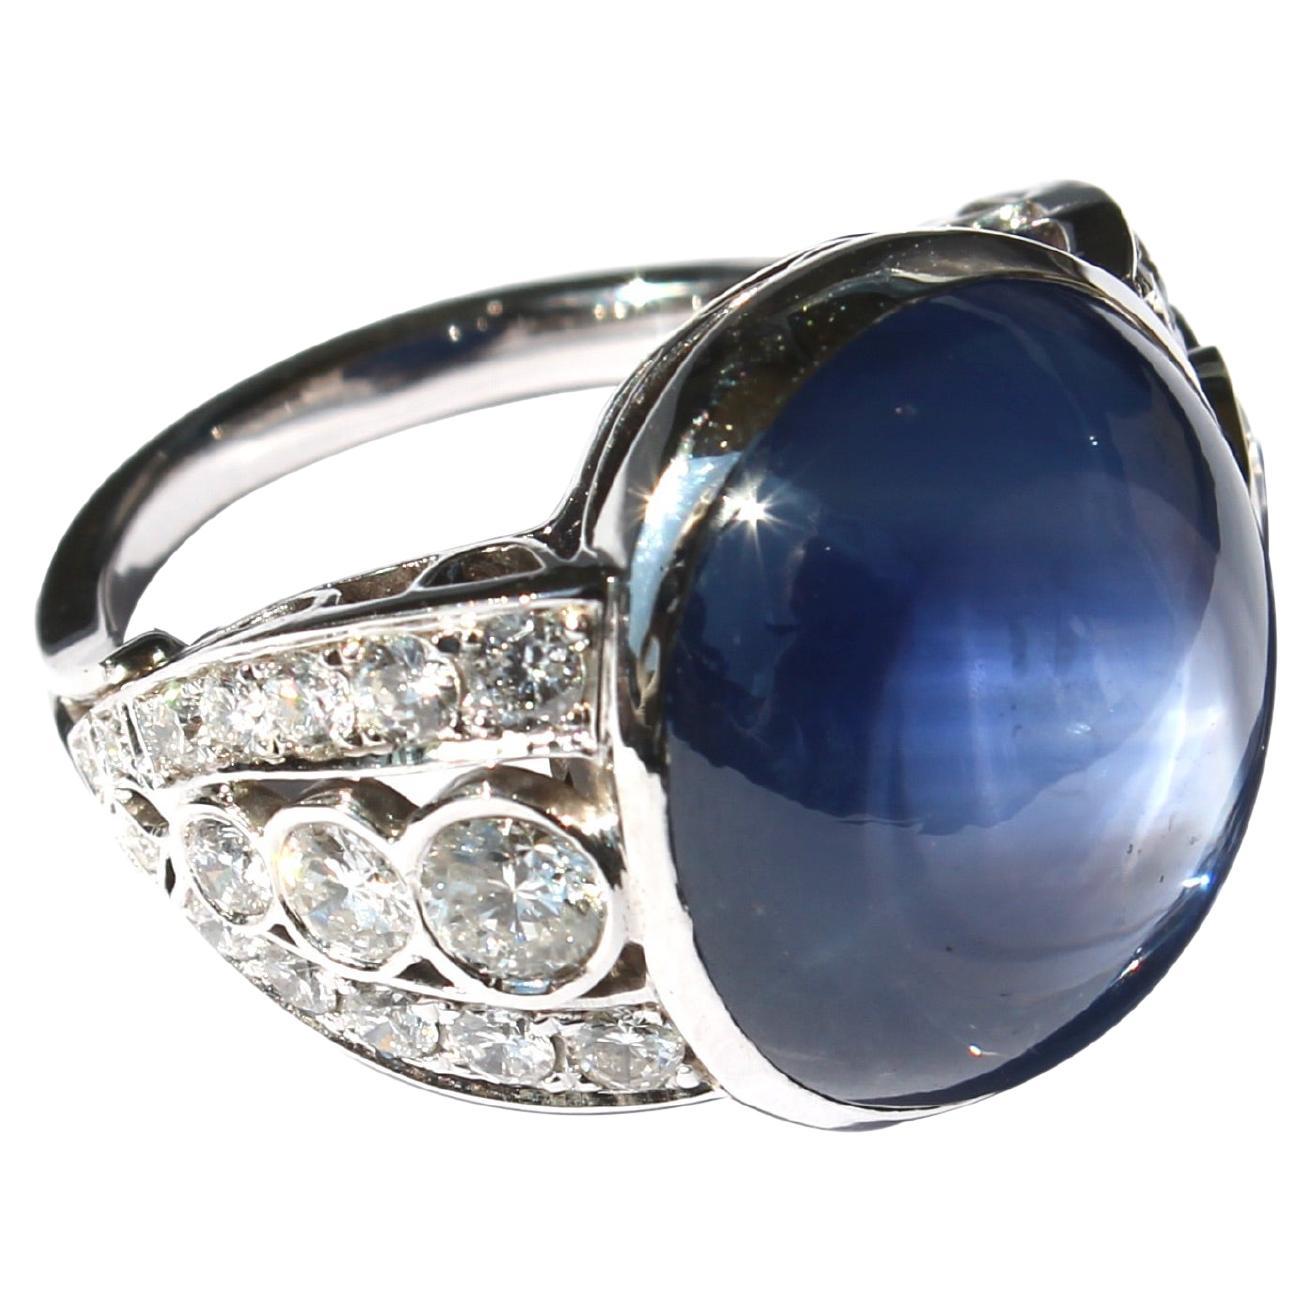 Cabochon 25.81 Carats Ceylon Sapphire and Gold 18k Ring